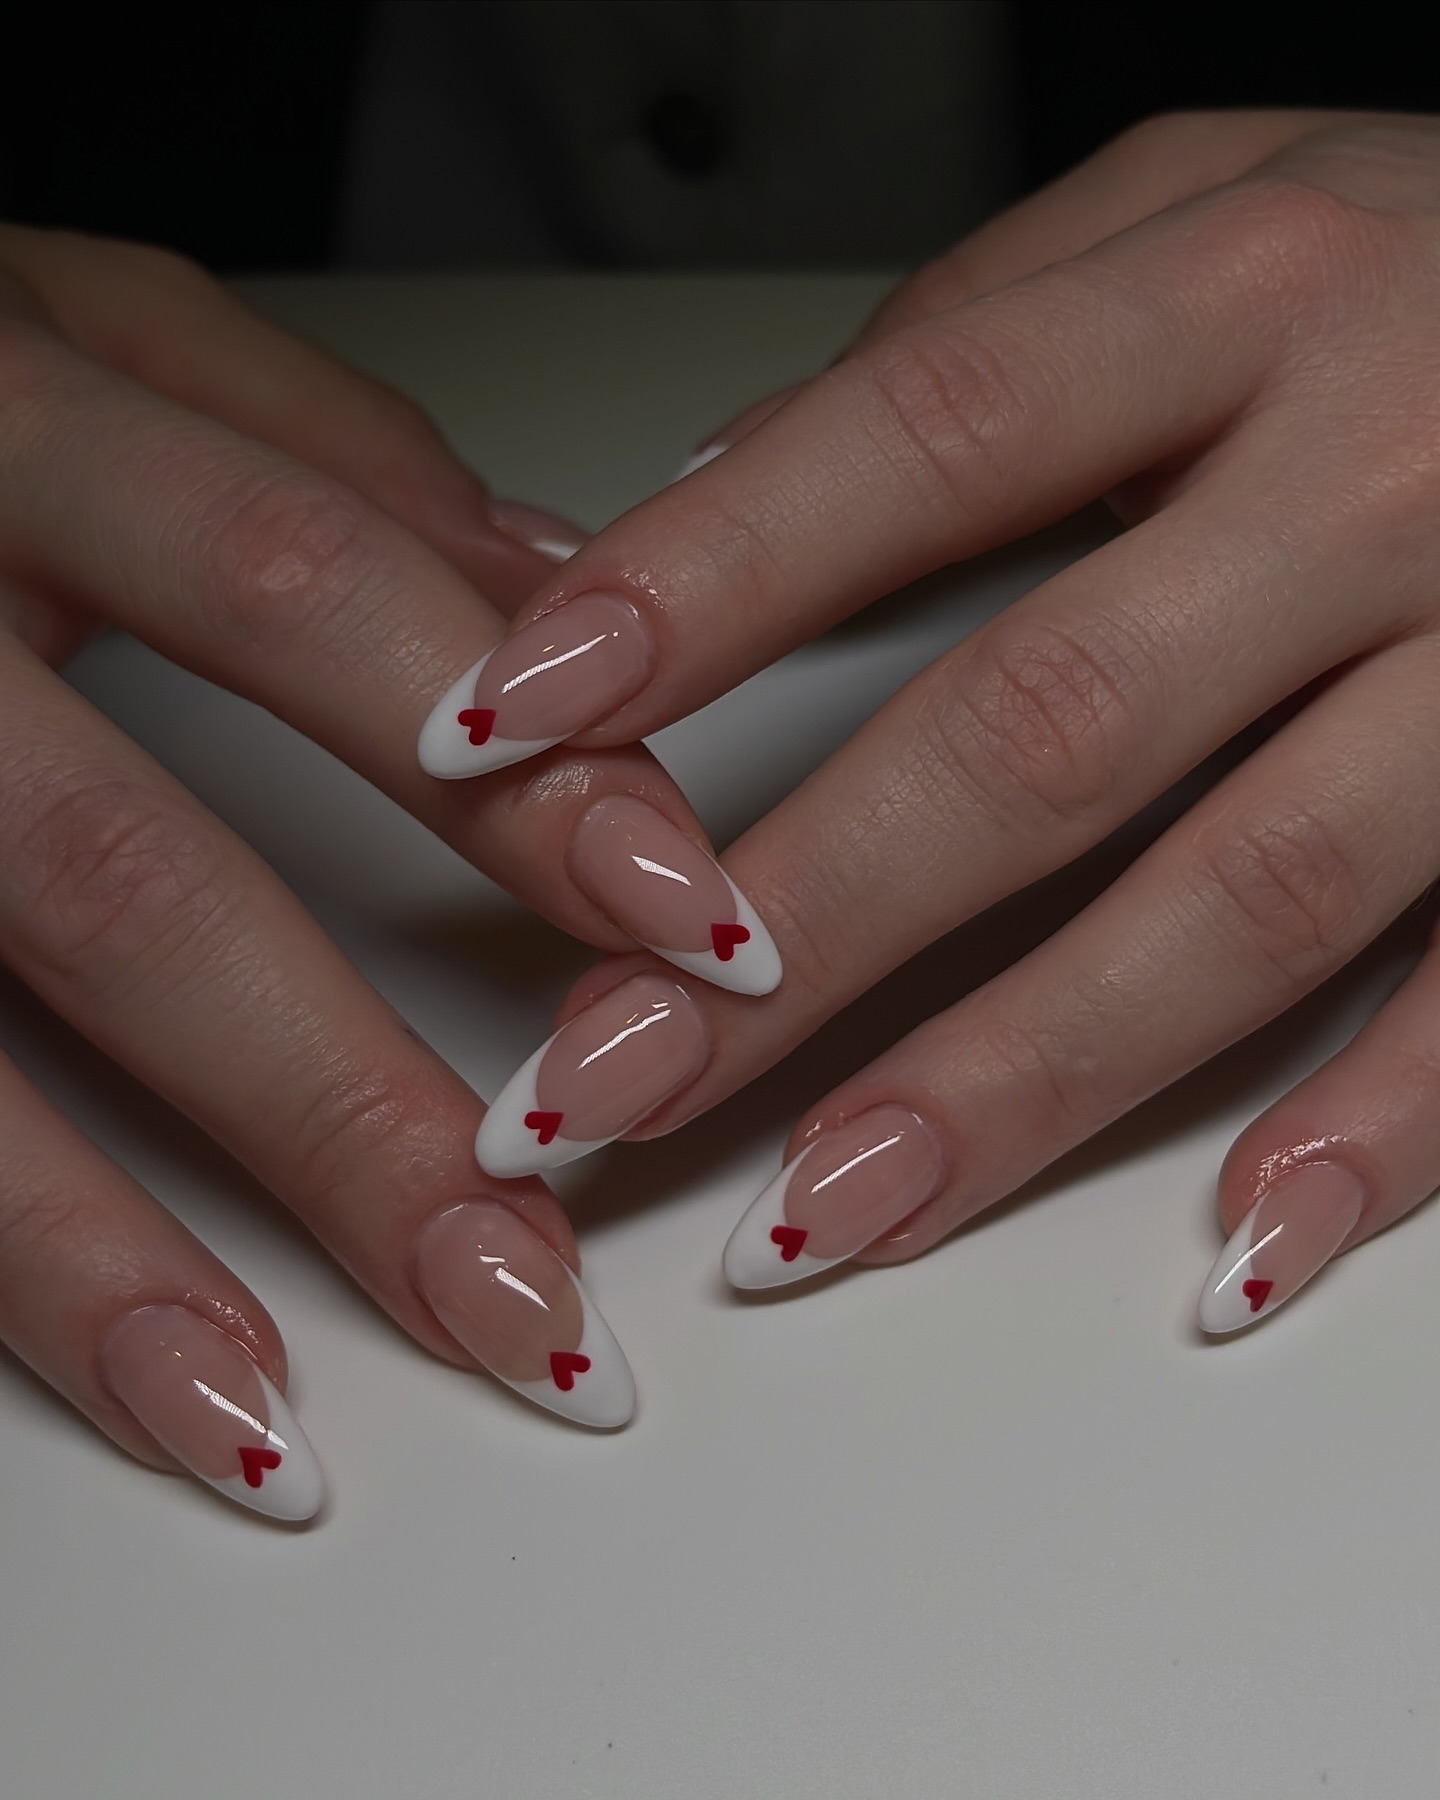 Charming French Manicure with Heart Accents